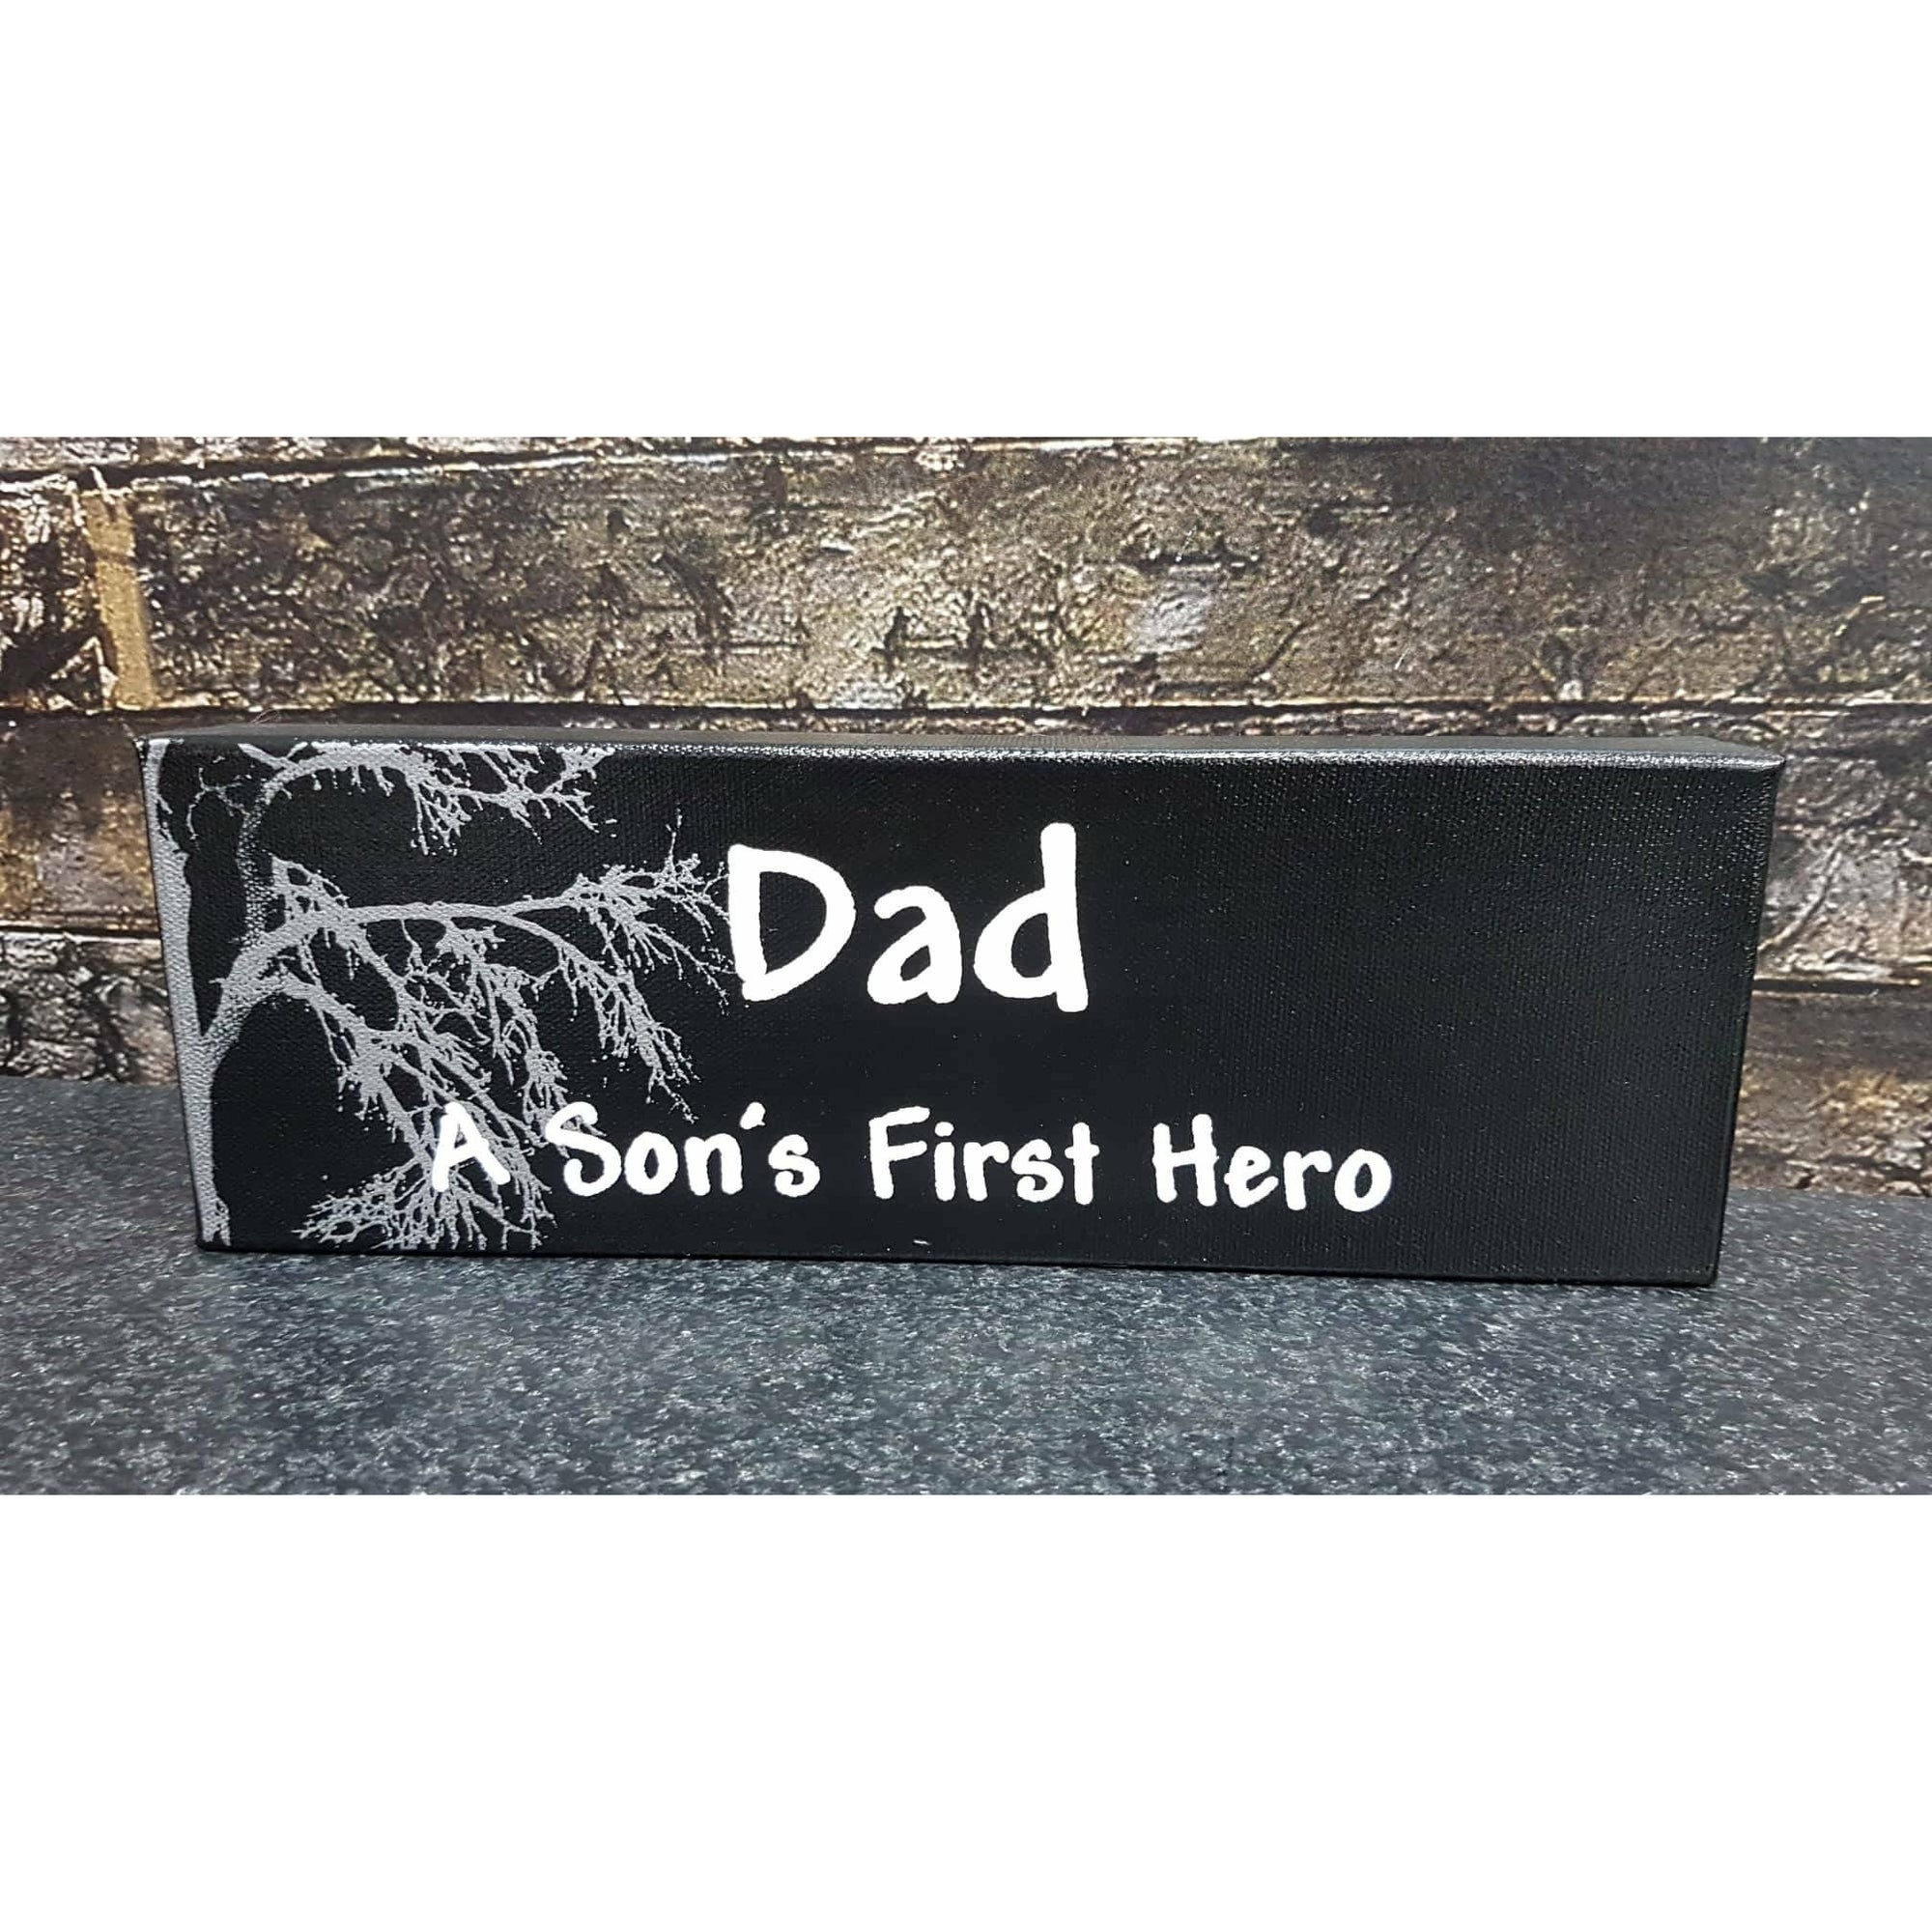 Dad - A Sons First Hero 4" x 12" Nufin Fitz